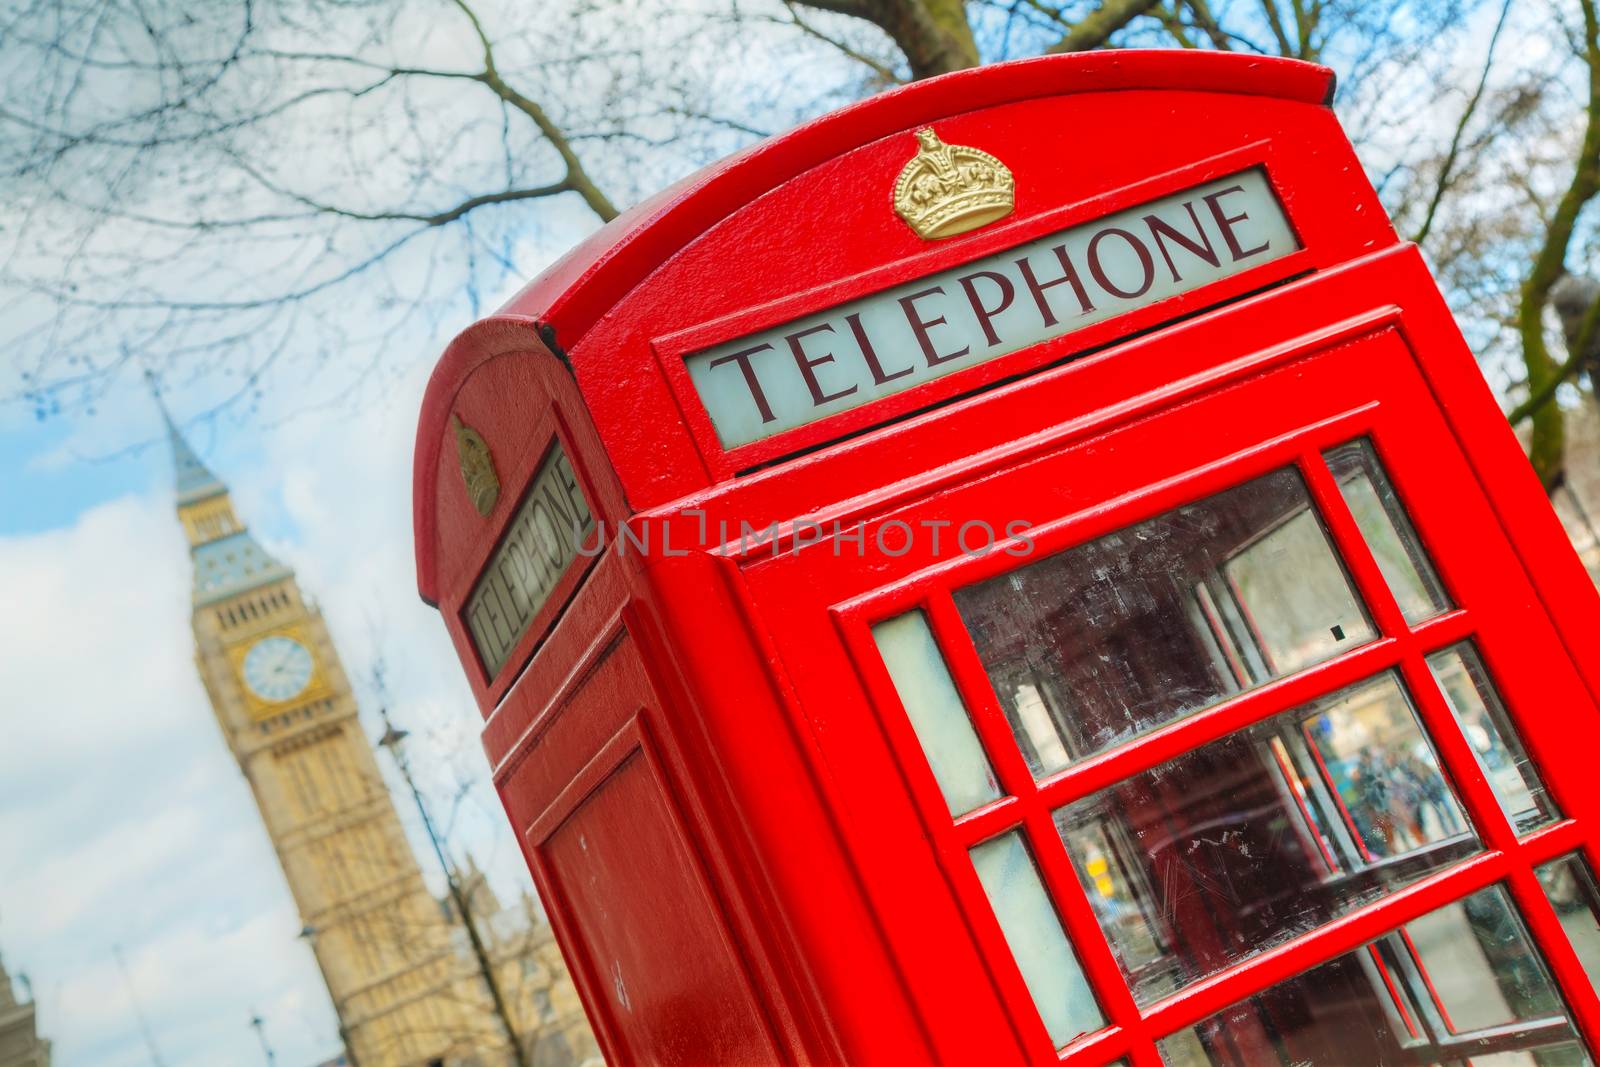 Famous red telephone booth in London by AndreyKr